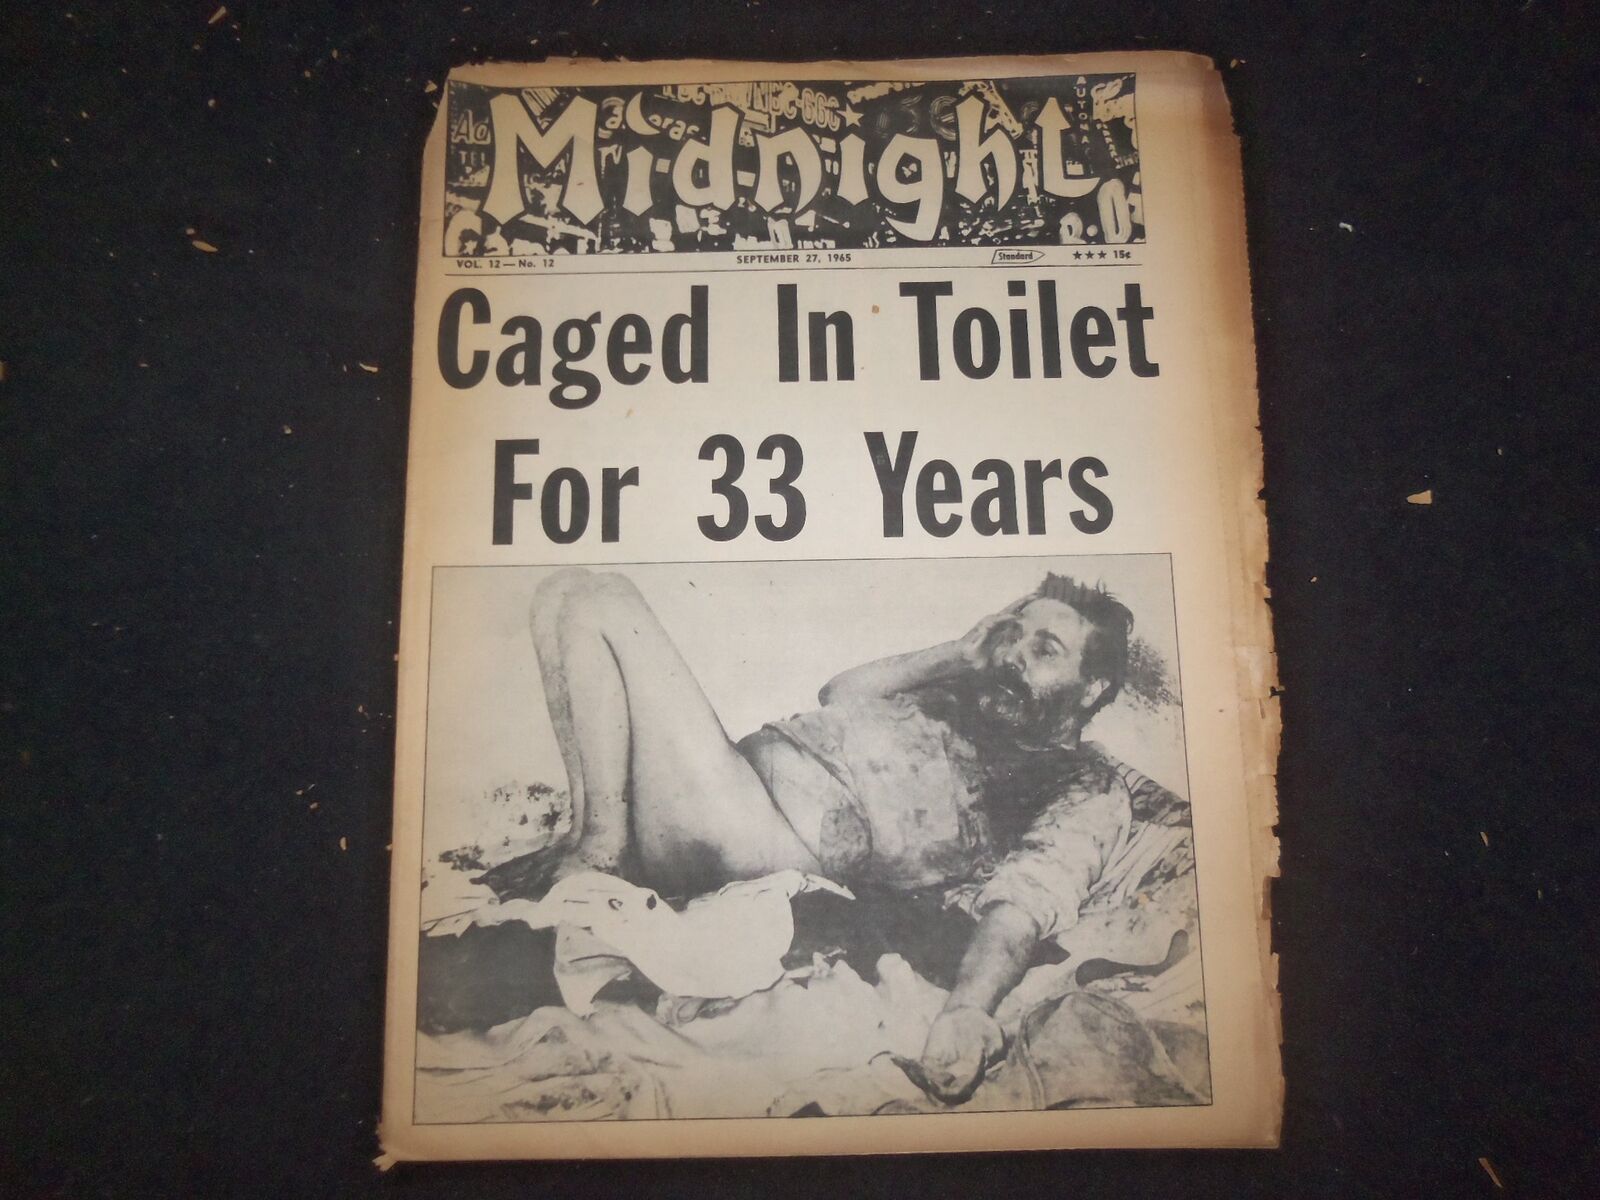 1965 SEPTEMBER 27 MIDNIGHT NEWSPAPER - CAGED IN TOILET FOR 33 YEARS - NP 7351